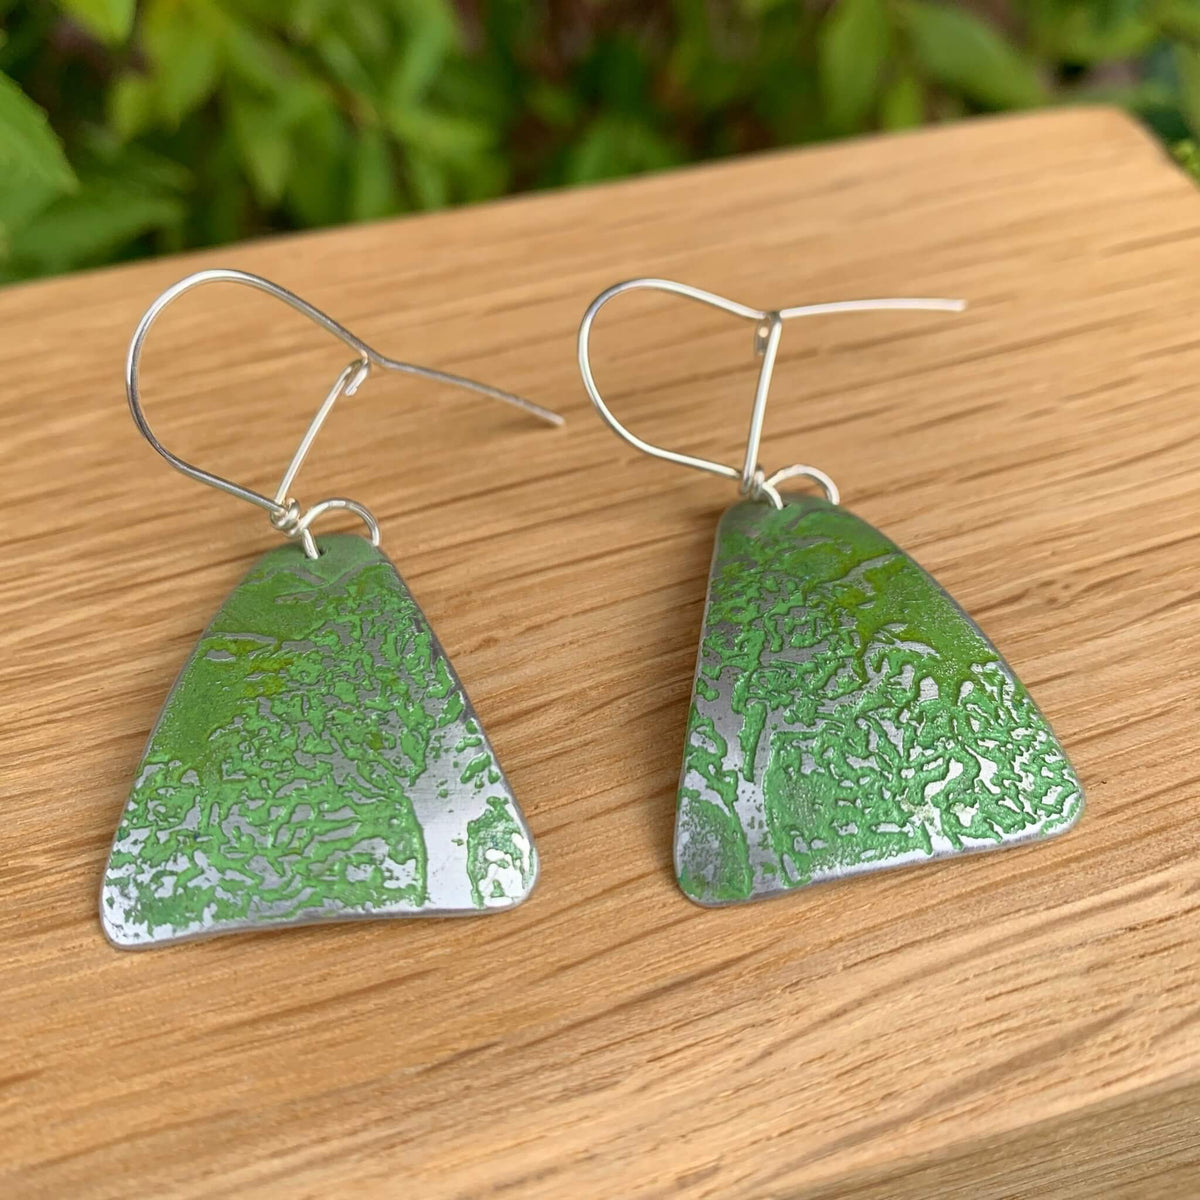 Green triangular aluminium earrings with etched tree